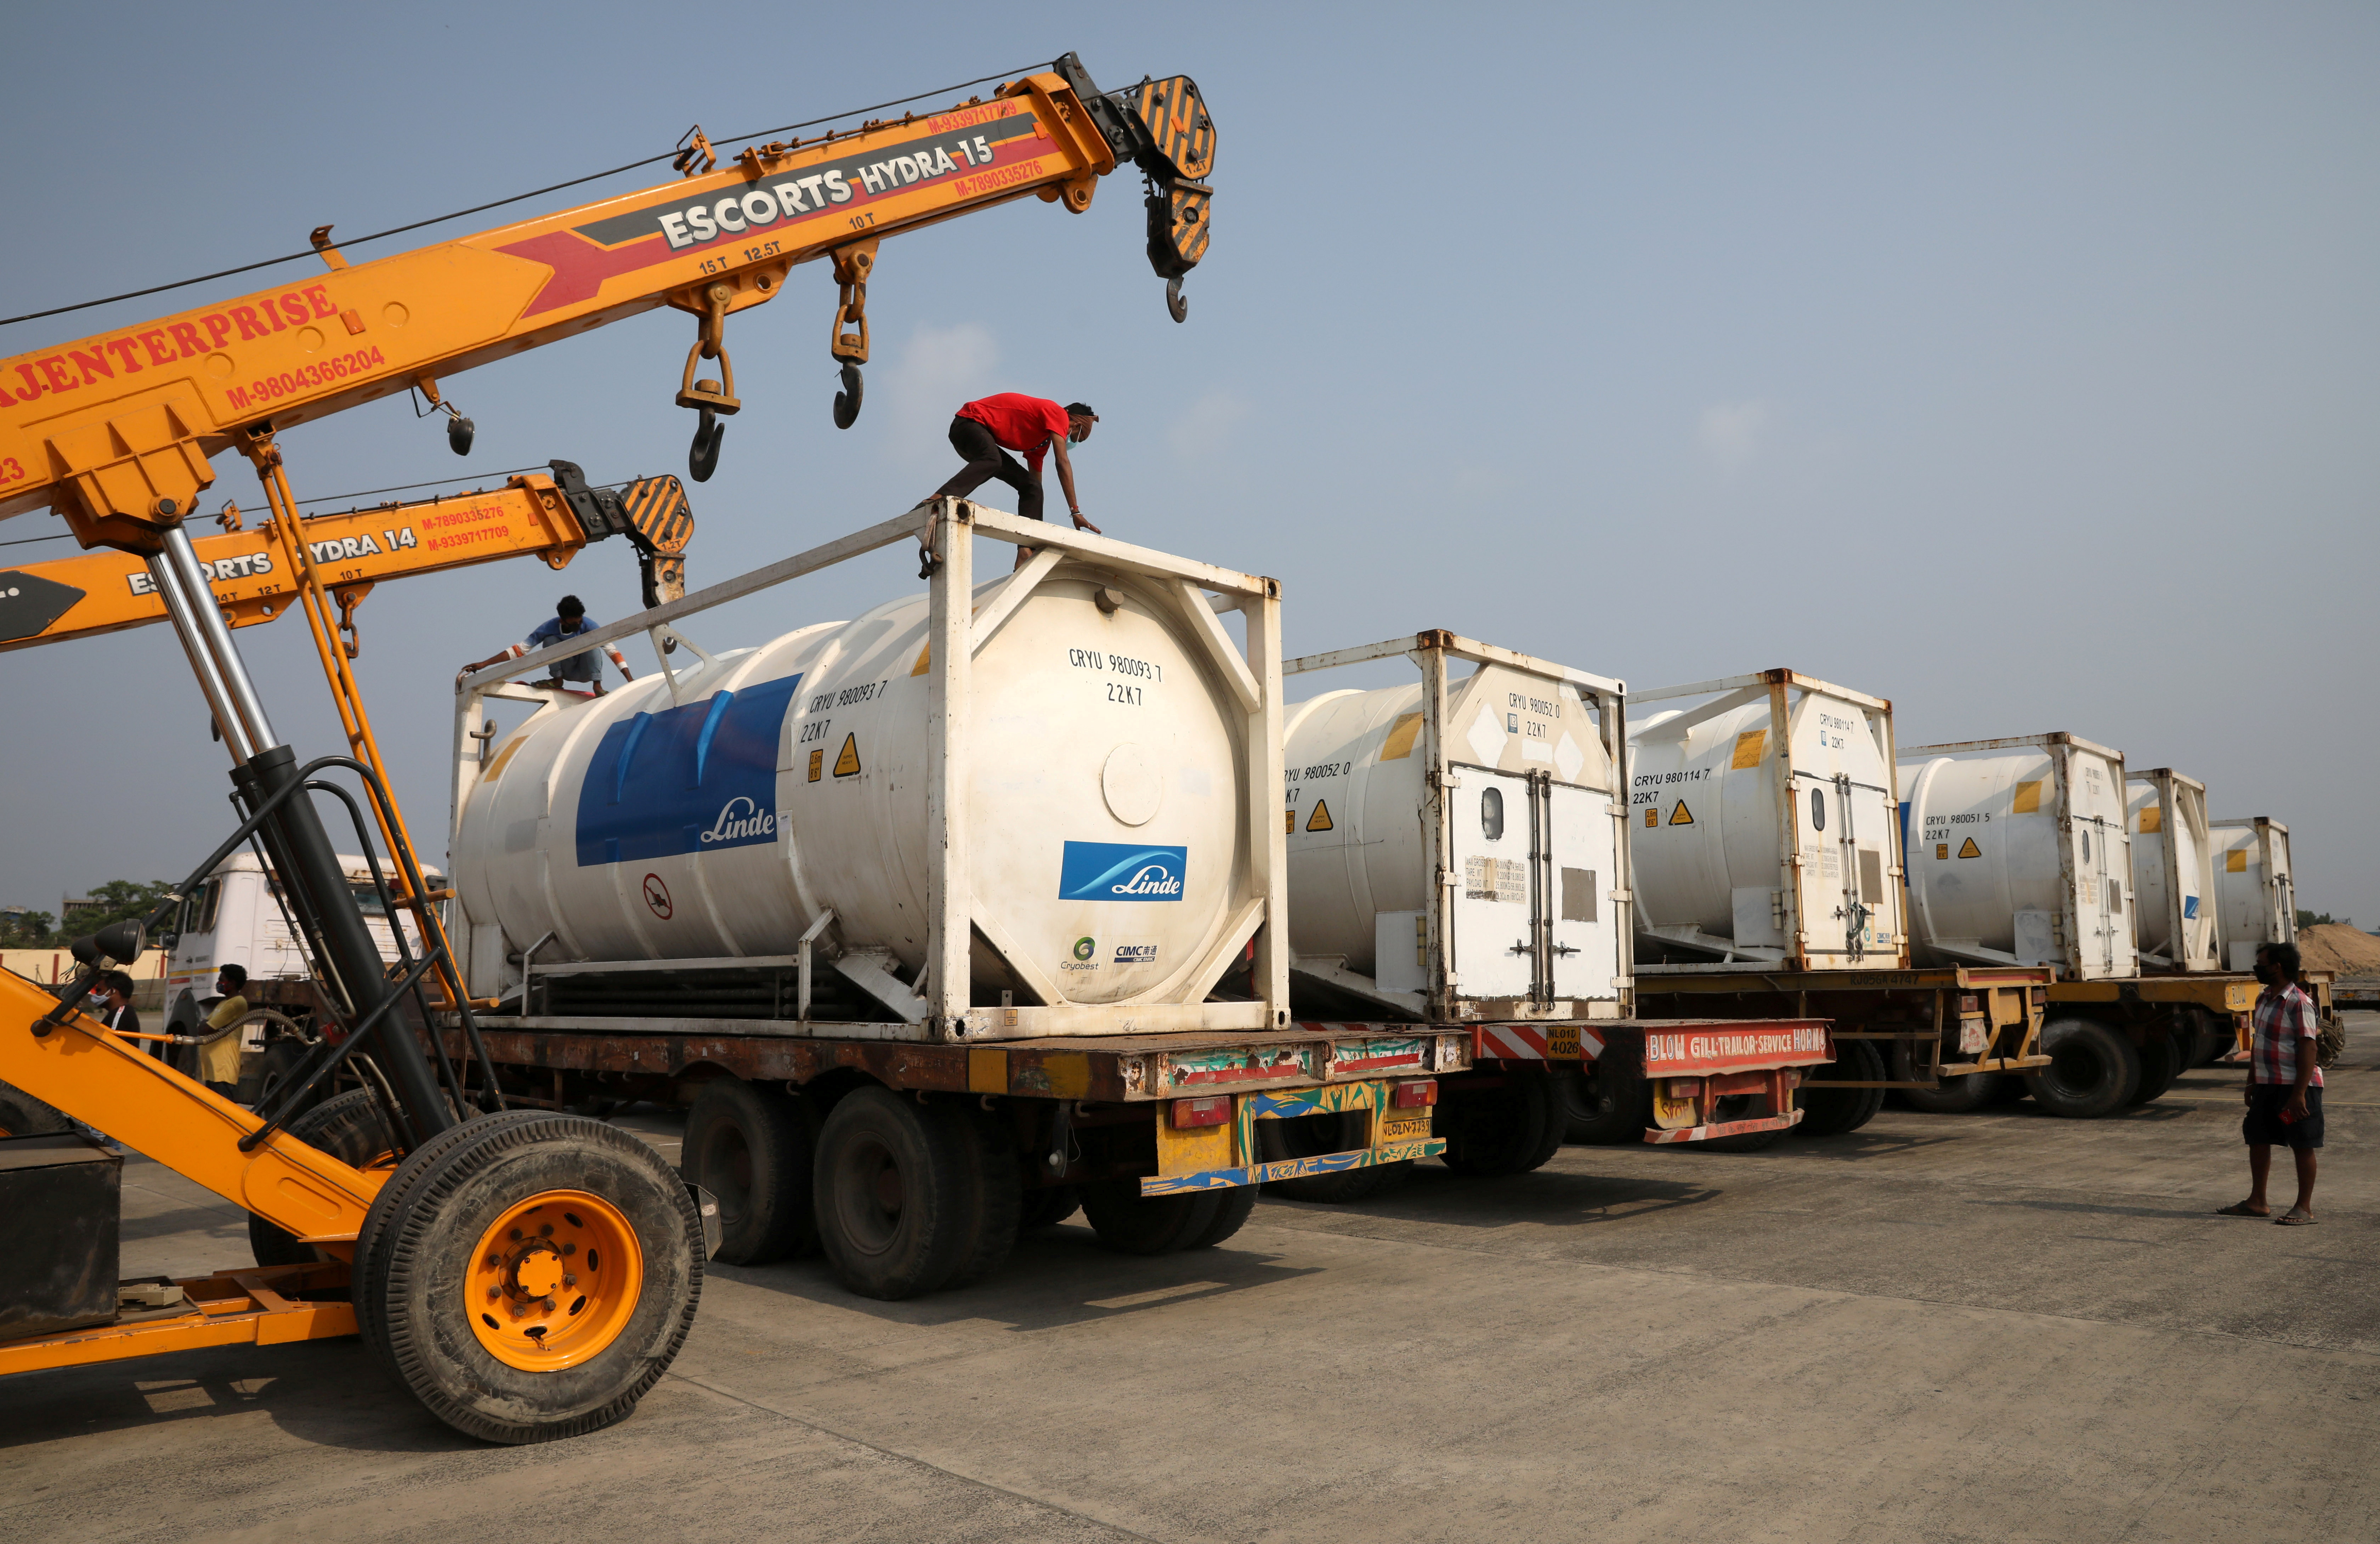 Men park Linde tankers after they arrived from abroad to help with coronavirus disease (COVID-19) crisis, in Kolkata